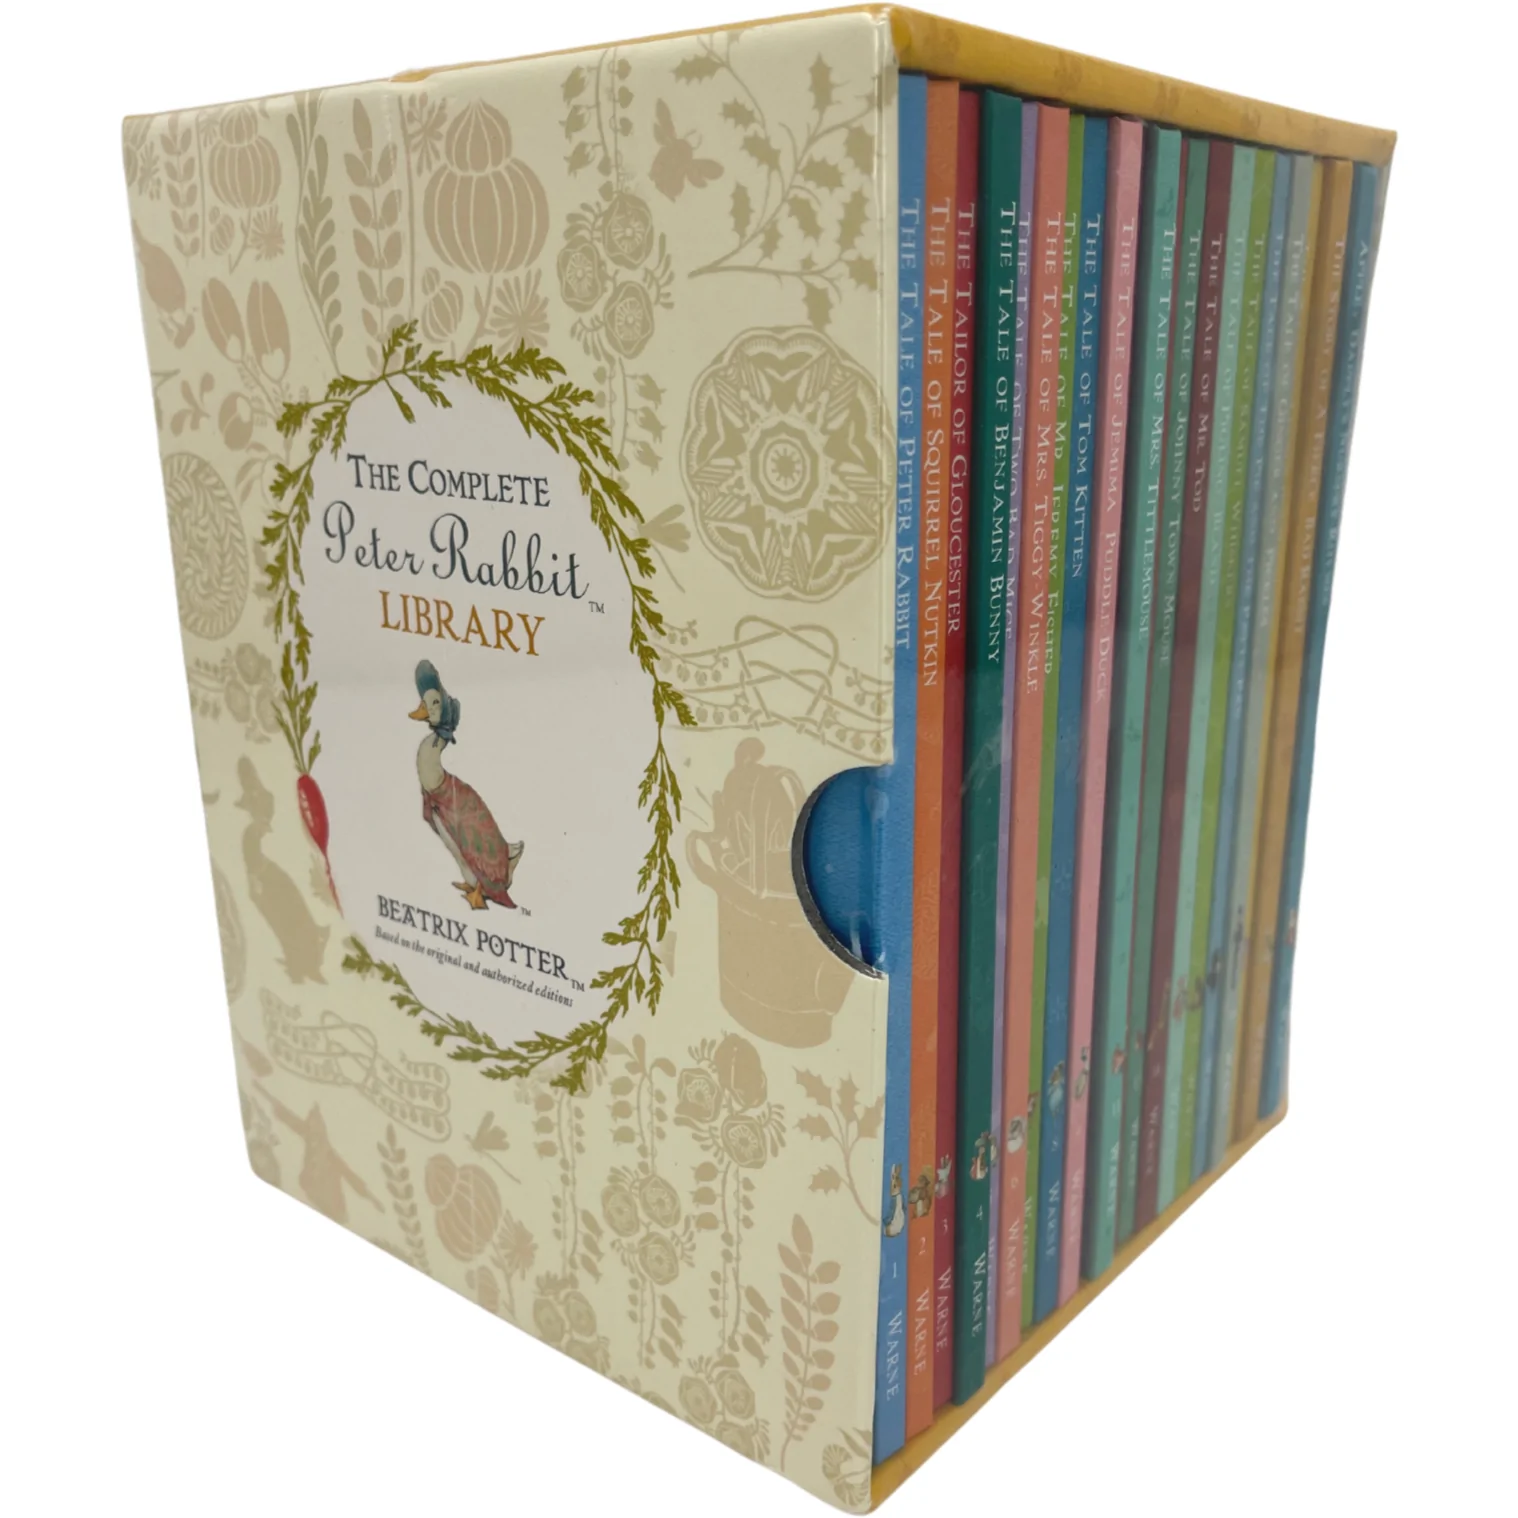 The Complete Peter Rabbit Library / 23 Book Box Set / Hardcover Books